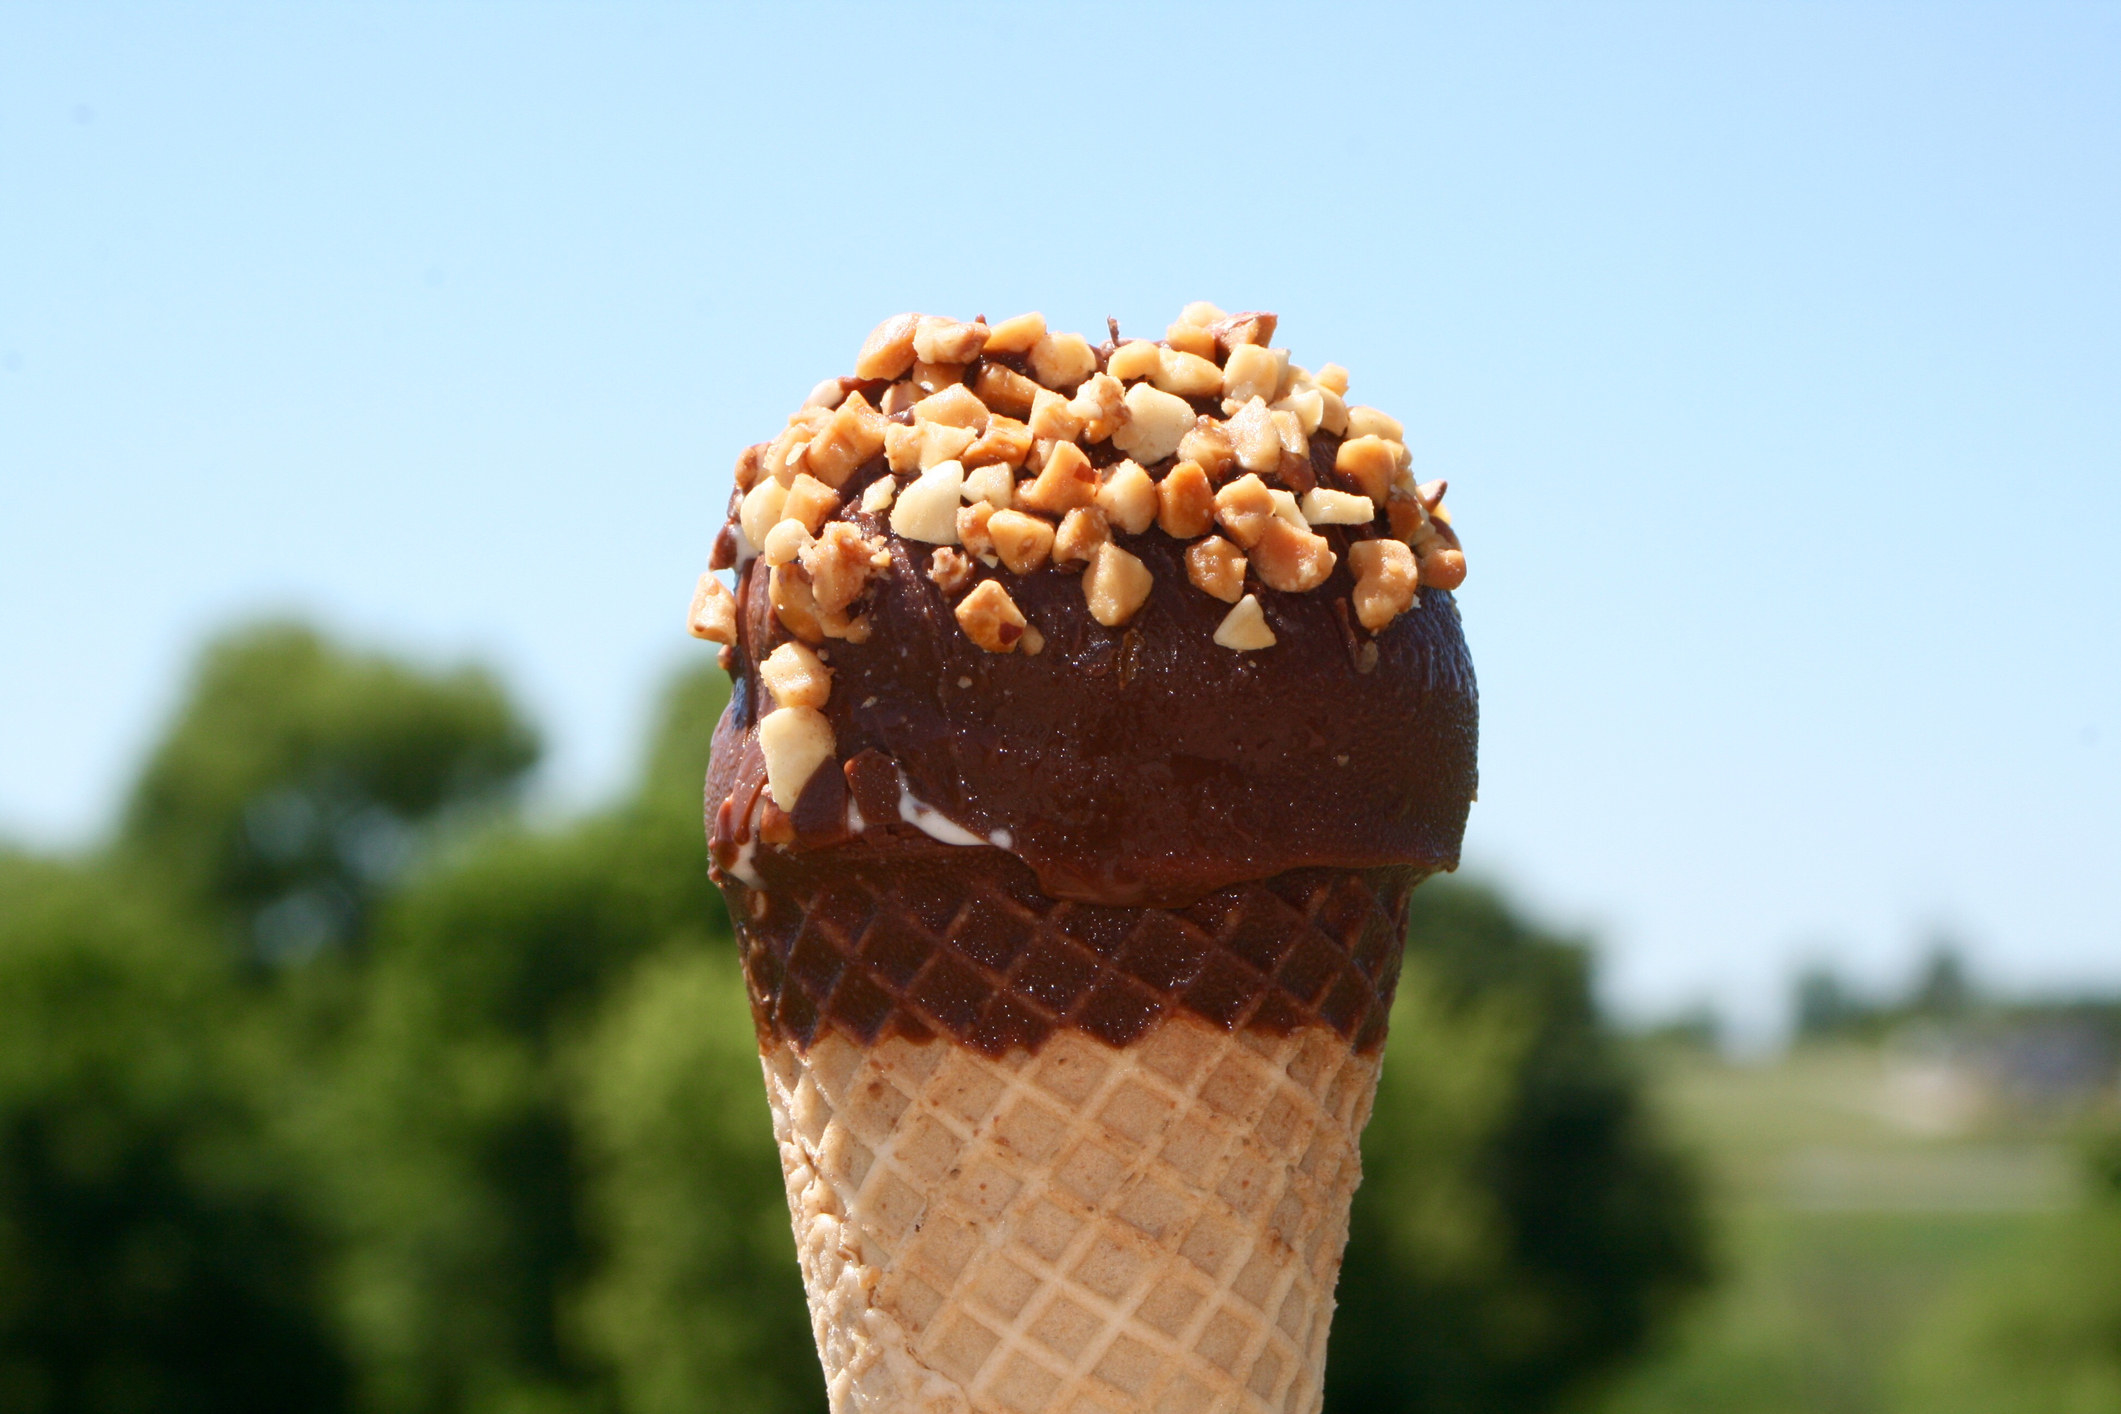 cone dipped in chocolate and covered in peanuts